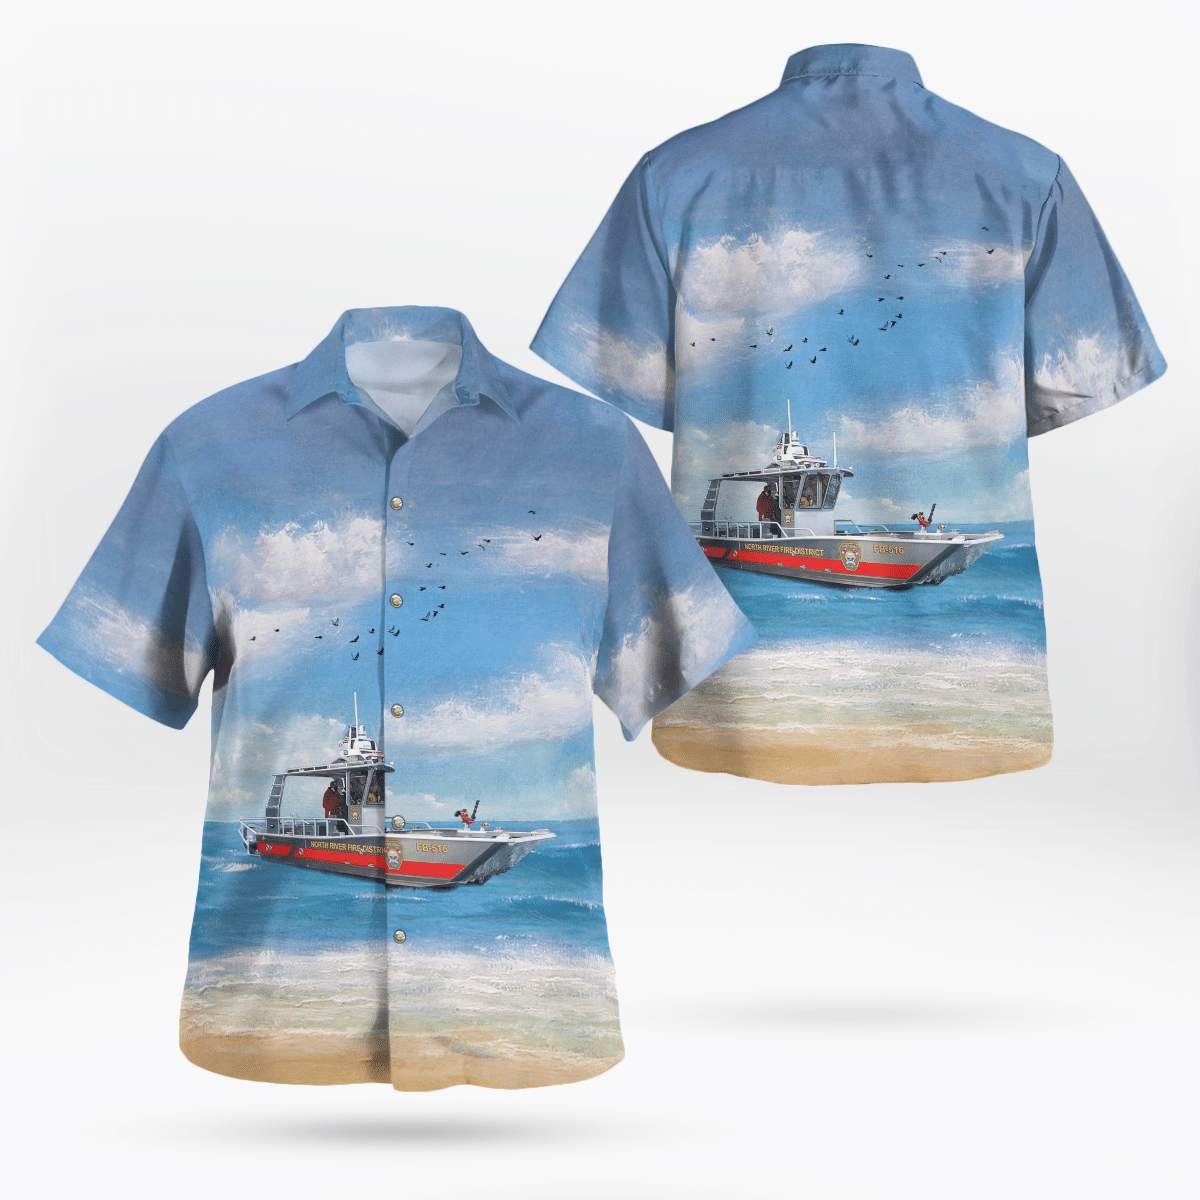 If you are in need of a new summertime look, pick up this Hawaiian shirt 20